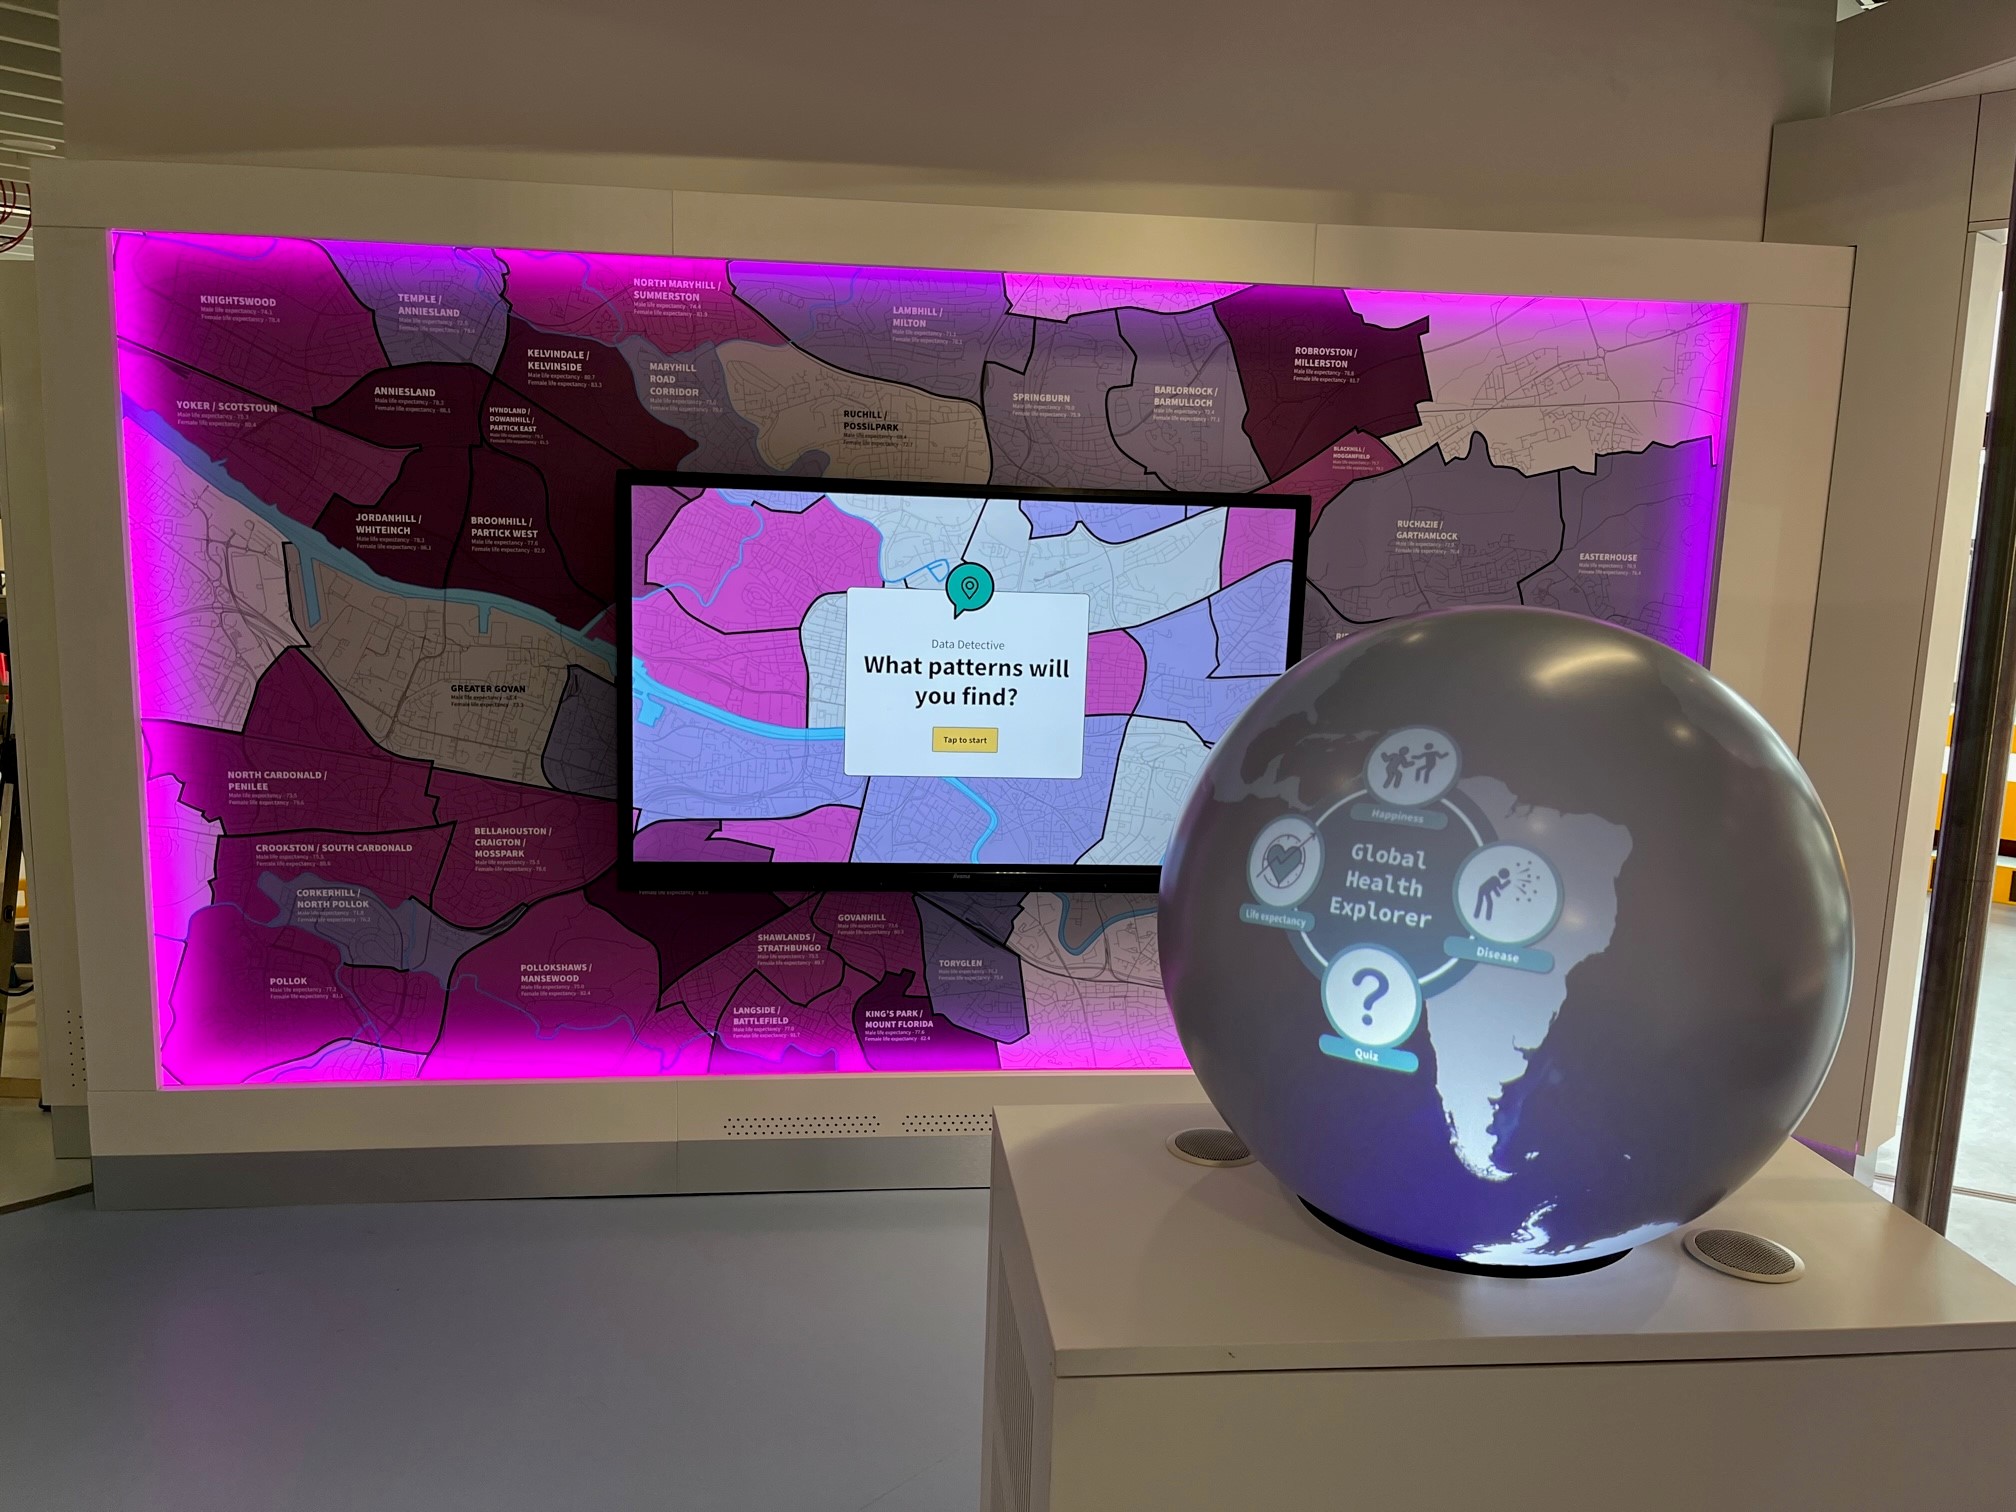 A lit up globe saying Global Health Explorer on a stand and behind a large map of Glasgow and a TV screen saying what pattern will you find? The installation is lit with a pink light around it.